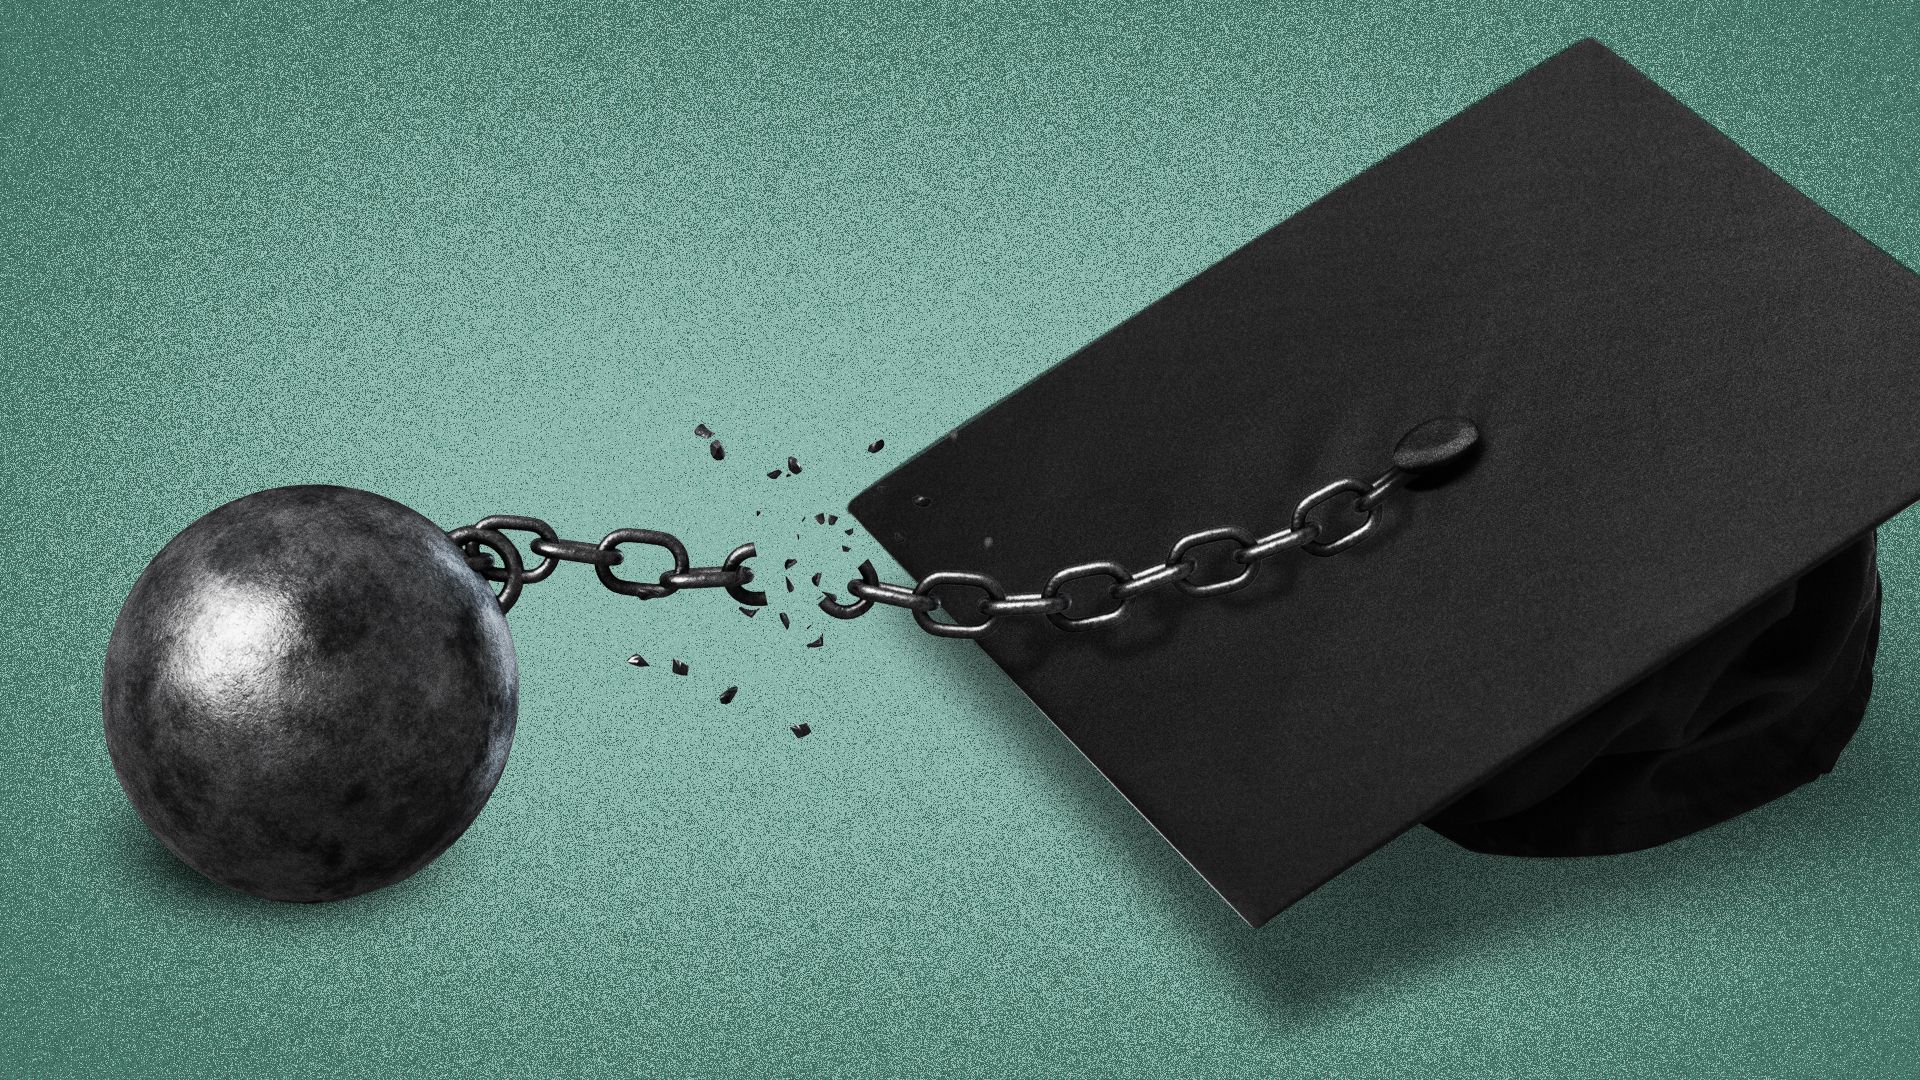 Illustration of a ball and chain replacing the tassel of a graduation cap, with the chains breaking.